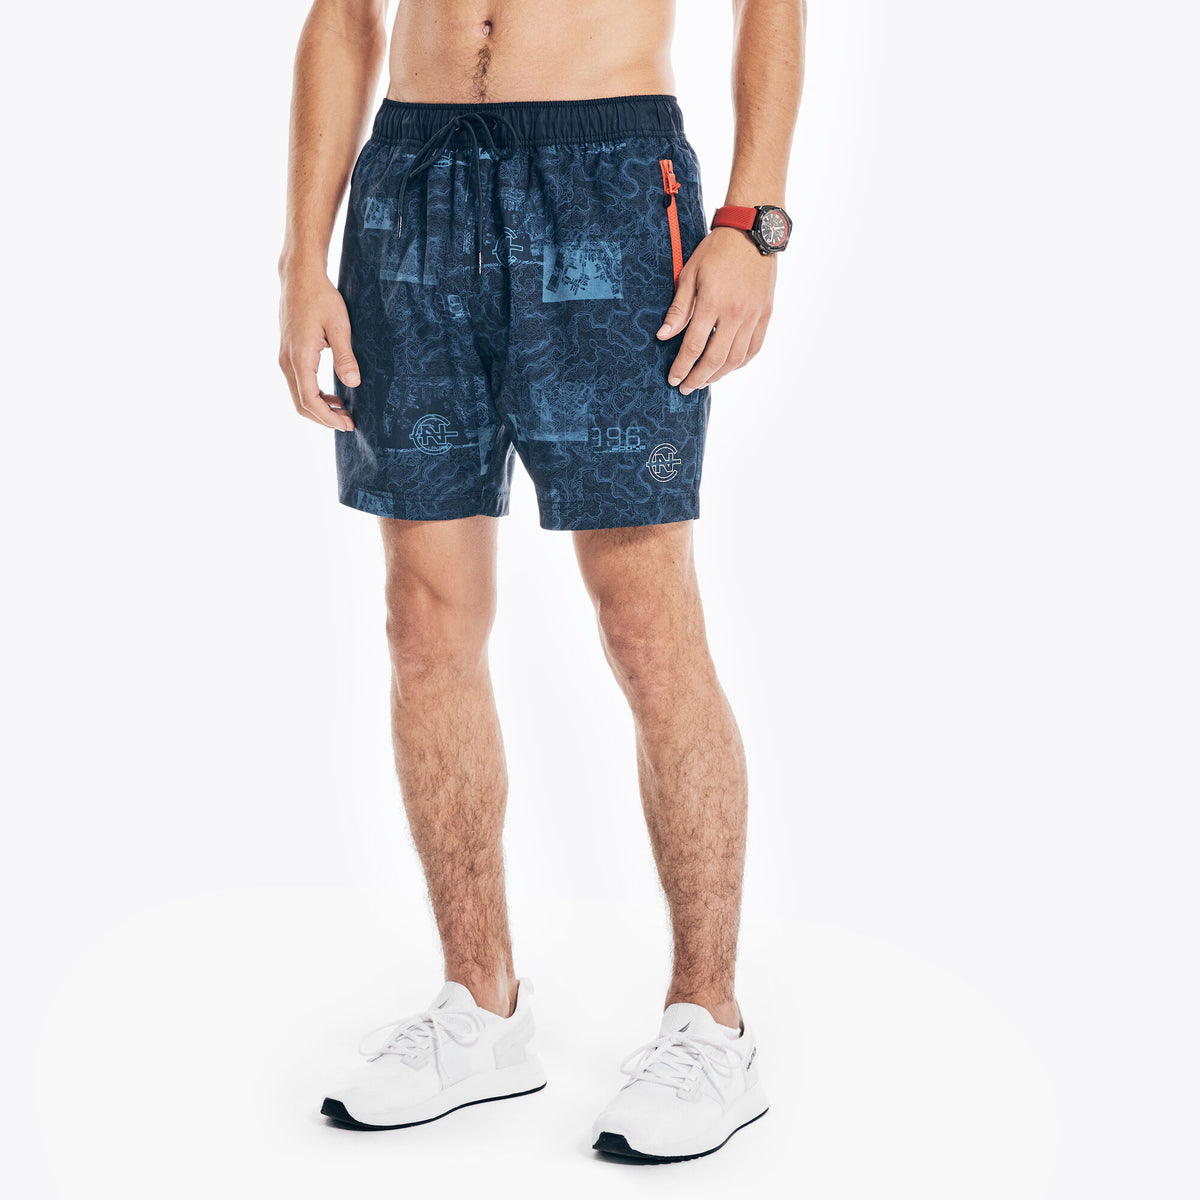 Nautica Men's Competition Sustainably Crafted 6" Printed Compression Short Navy